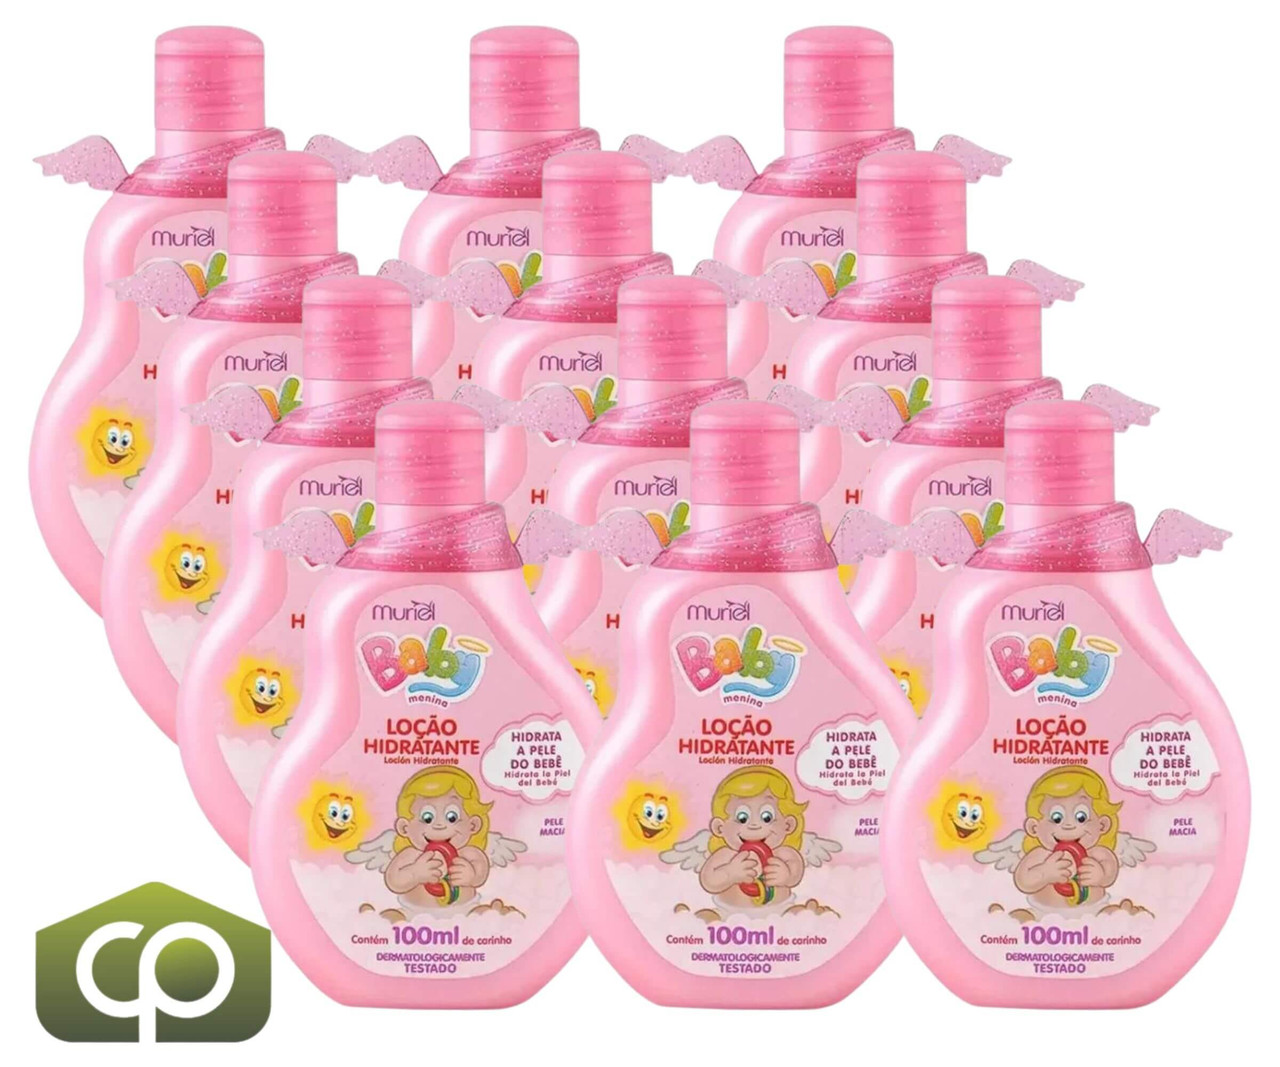 Muriel Baby Moisturizing Lotion - Girl (12/Case) 100ml - Gentle Care for Skin - Chicken Pieces